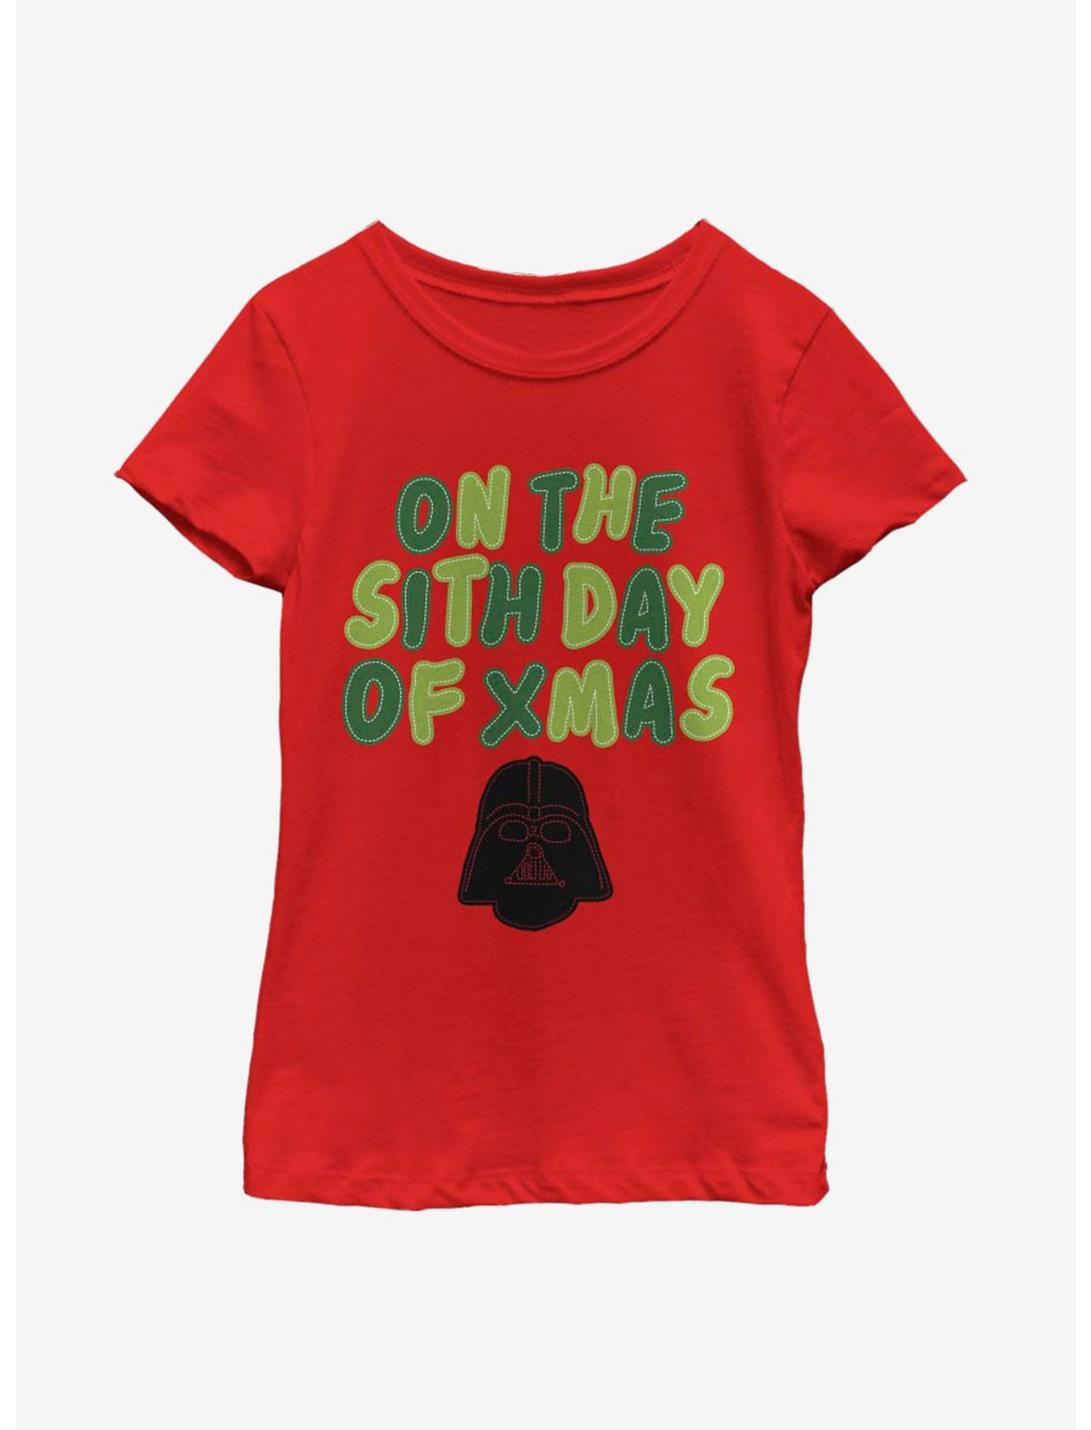 Star Wars Sith Day Youth Girls T-Shirt, RED, hi-res